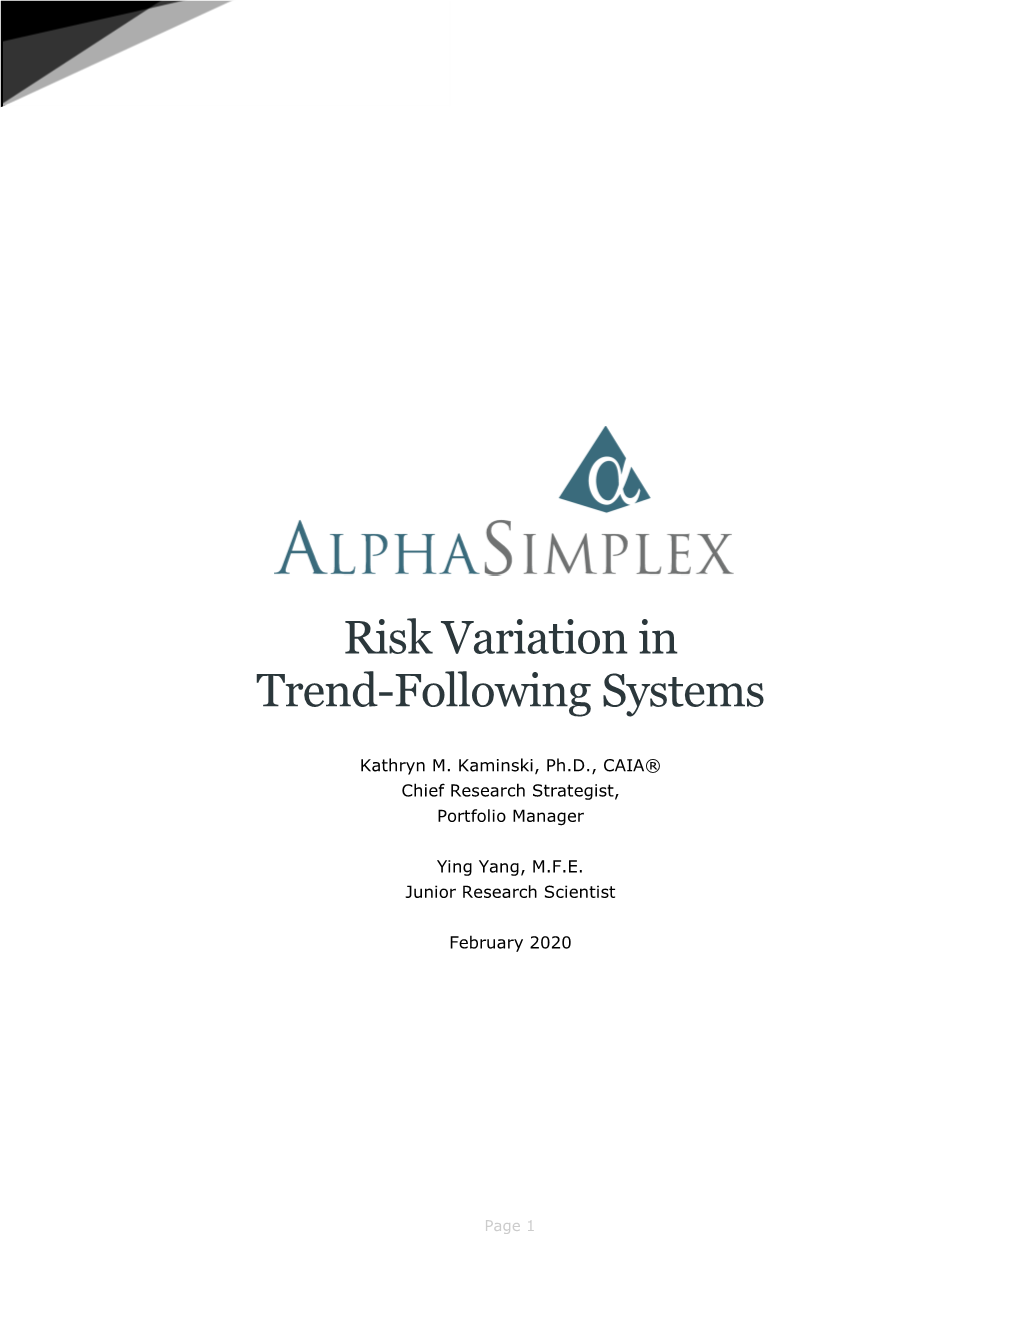 Risk Variation in Trend-Following Systems